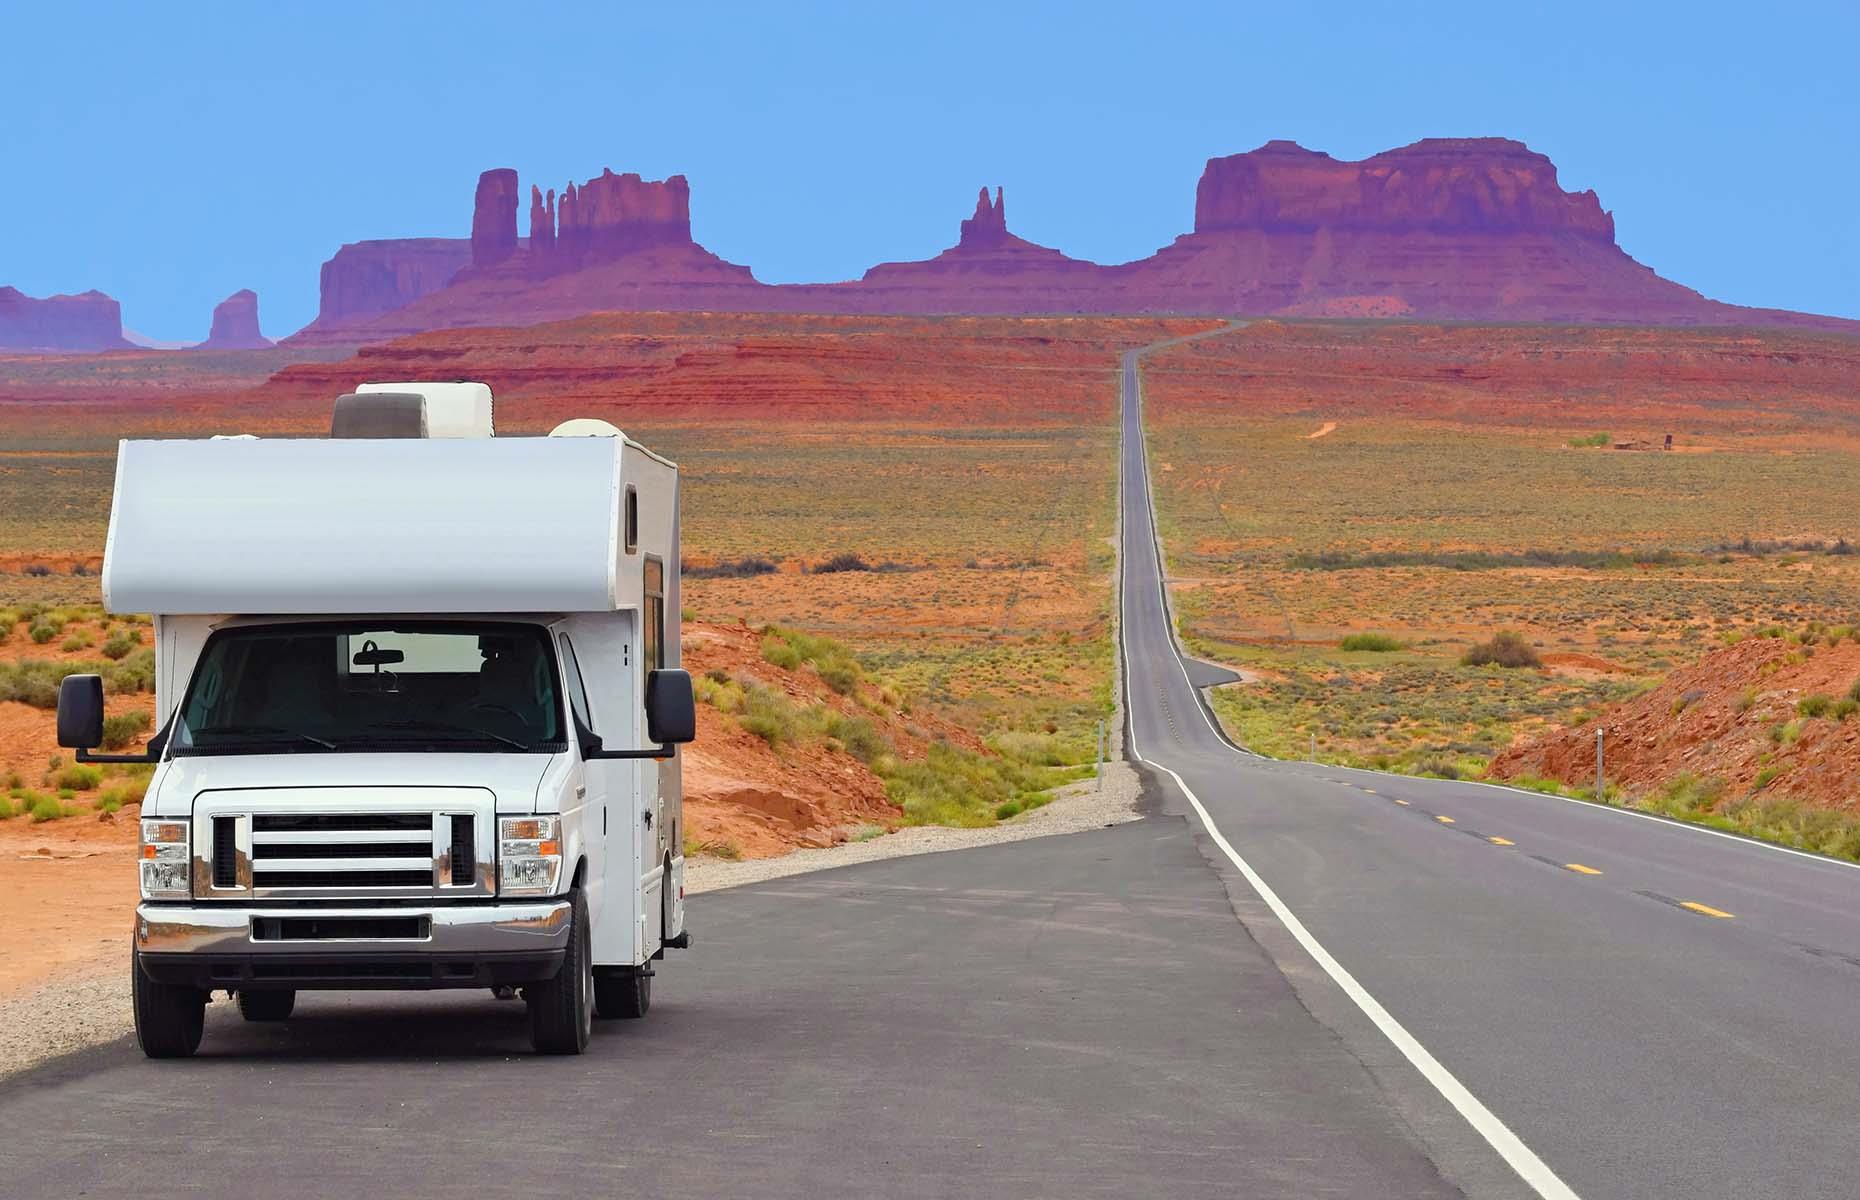 The world locked down during the COVID-19 pandemic and, as it gradually reopened, the RV was an attractive choice for vacationers: they're self-contained, they lend themselves to multi-generational travel and they offer an open road that's ideal for social distancing.